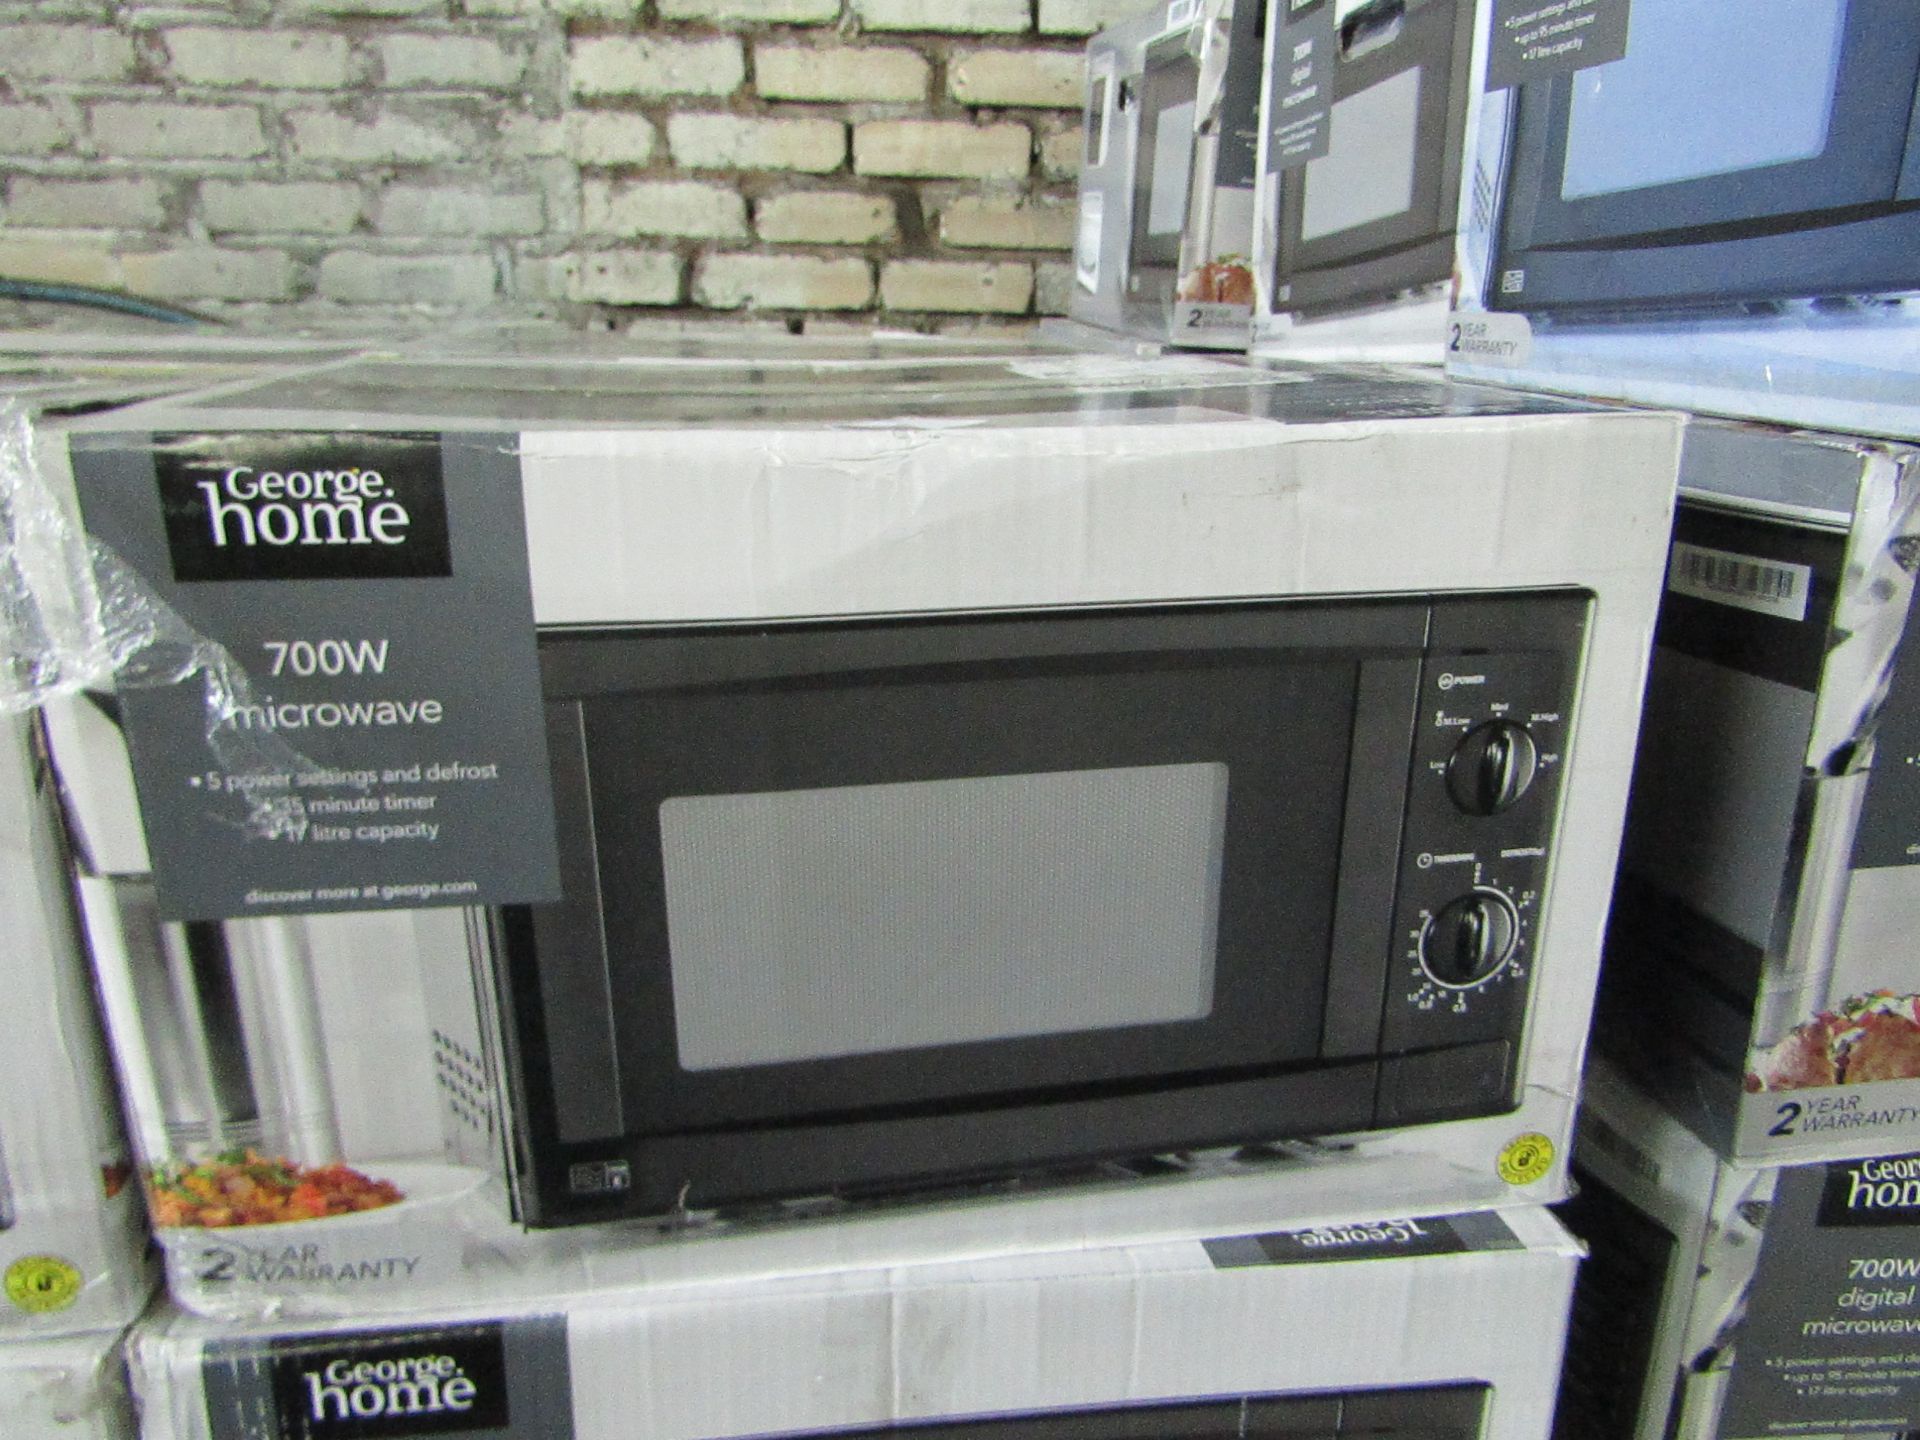 5x 700w Manual Microwave Ovens - Black - Unchecked & Boxed - RRP £40 - Total lot RRP £200 - Load Ref